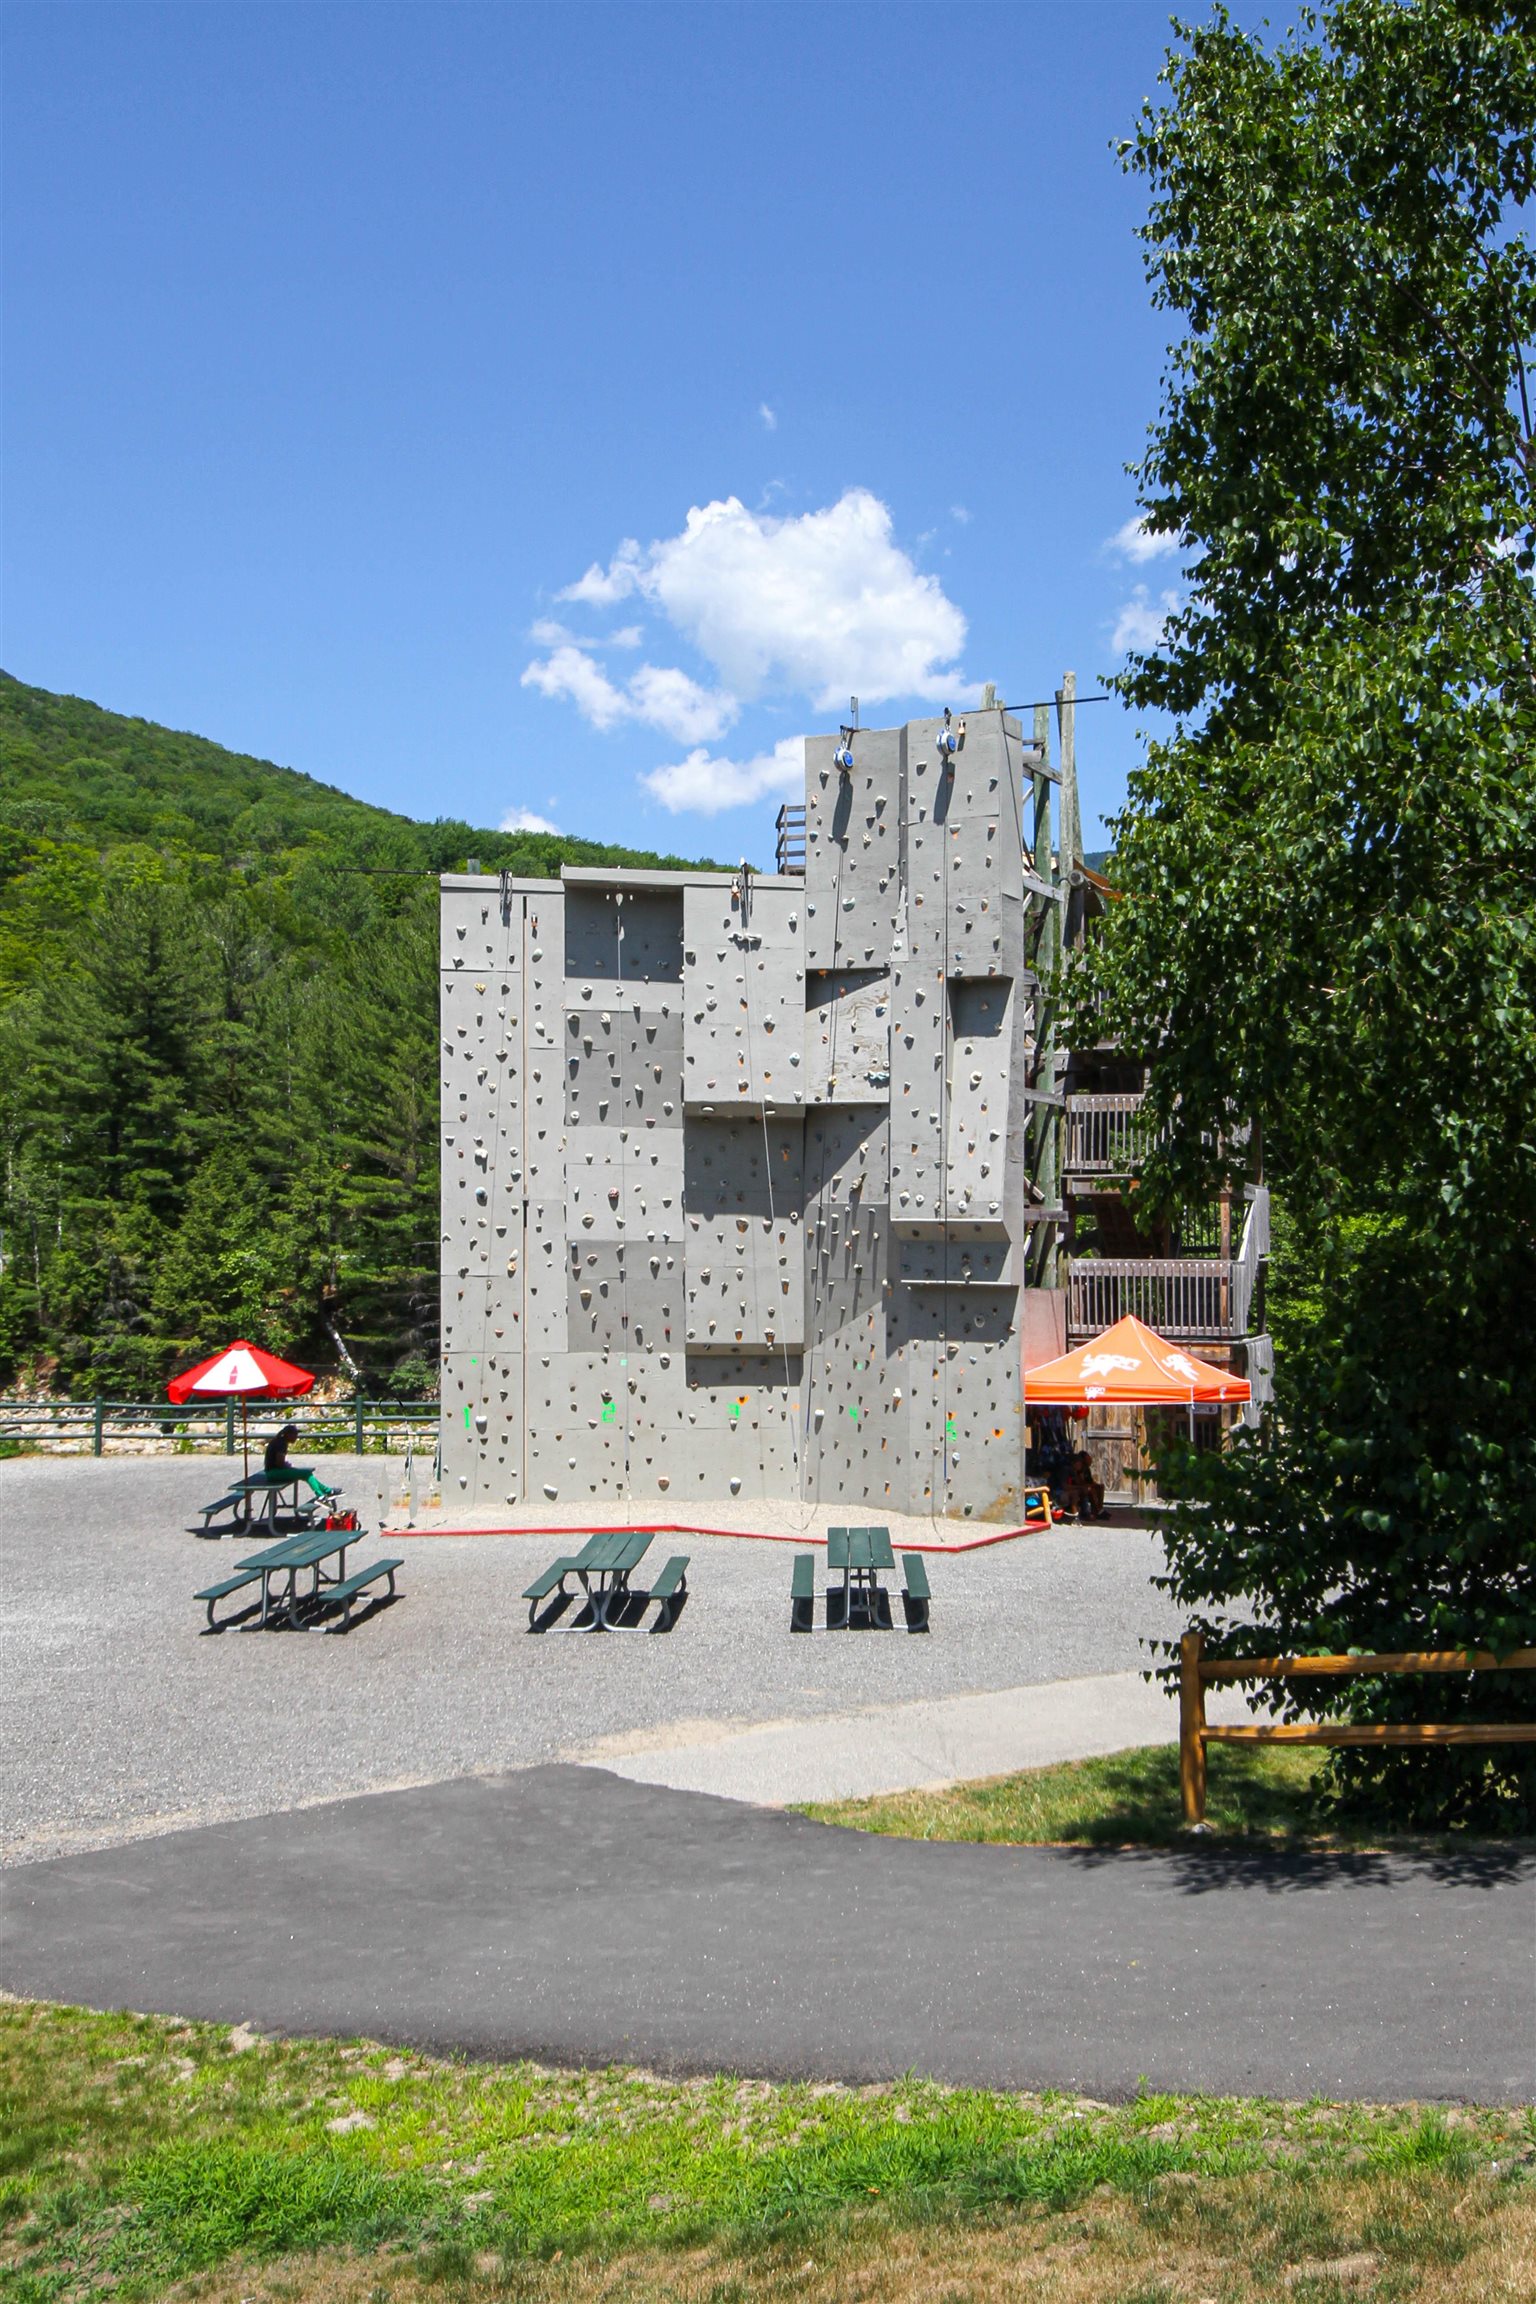 One of the many activities available at Loon Mountain.  Ski, Snowboard, Mountain Bike, Rock Wall Climbing, Zipline, Gondola Ride, Disc Golf, Yoga, Cross-Country Ski, E-Bike, Hike, Lessons and Rentals.